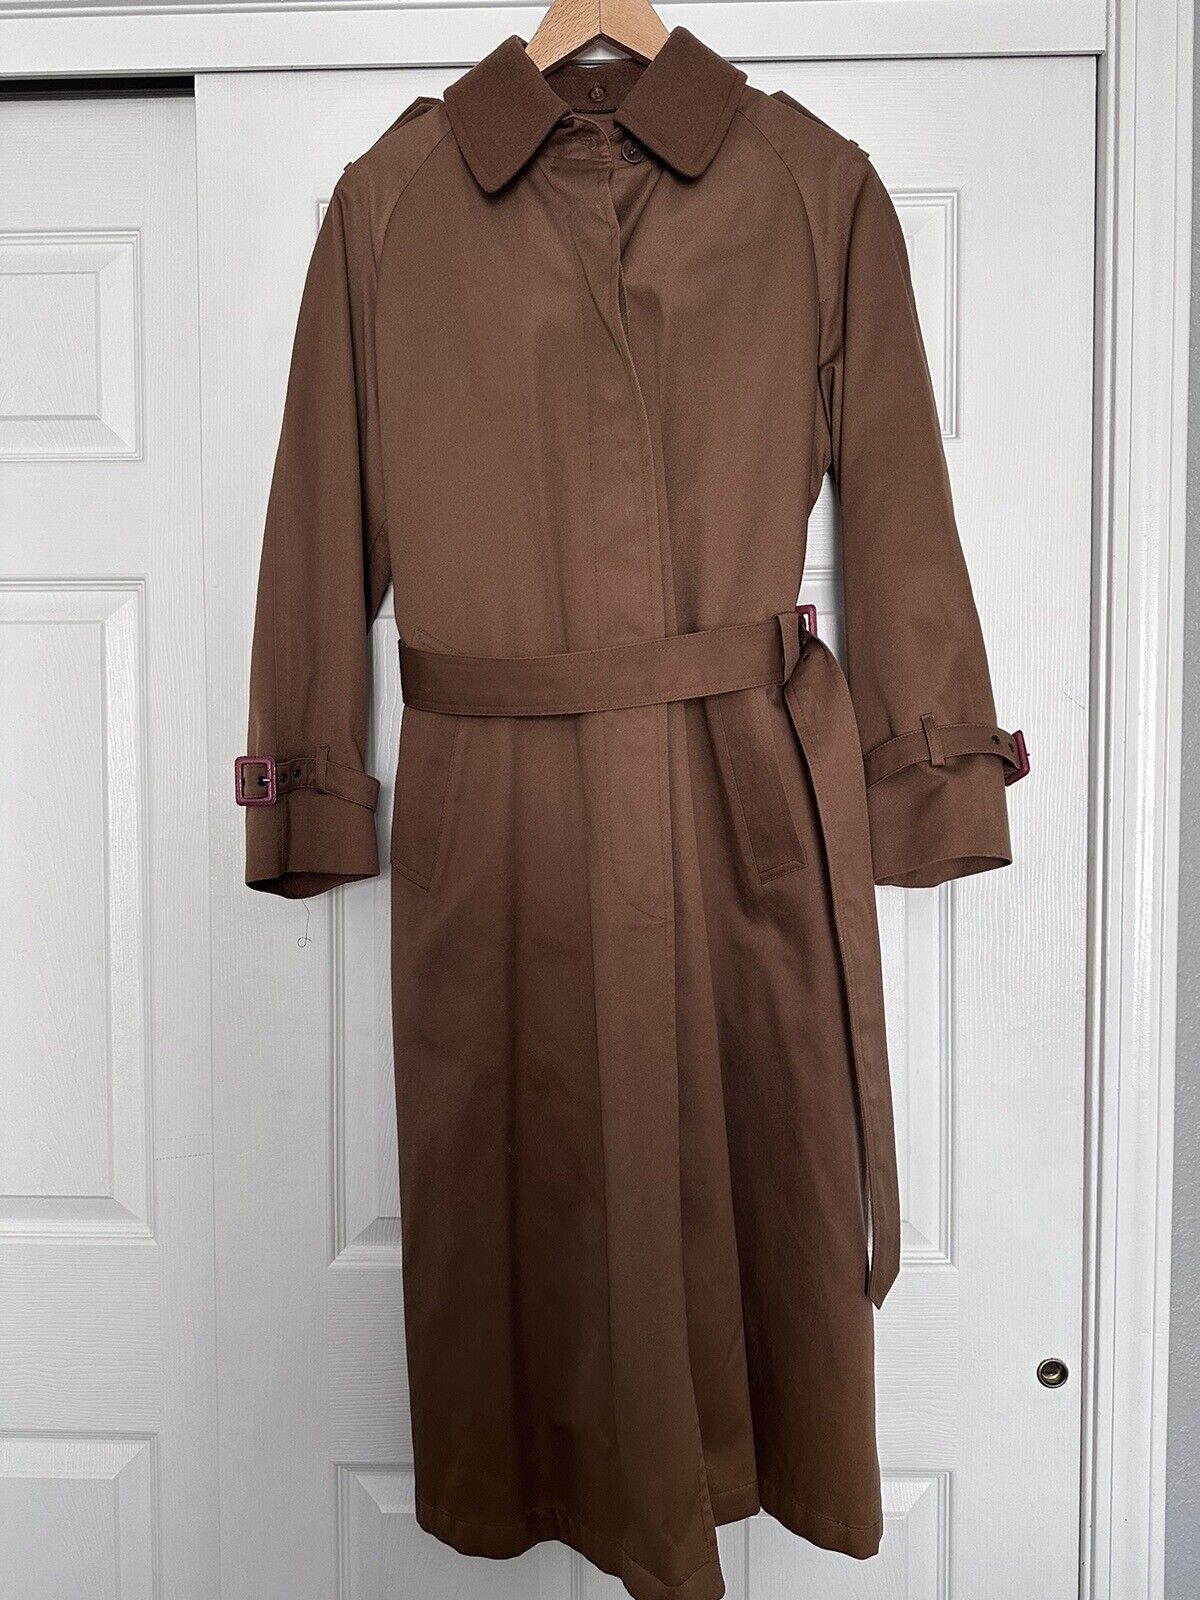 Vintage 1970’s United Airlines Trench Coat Fashionaire Size 8 Regular NEW